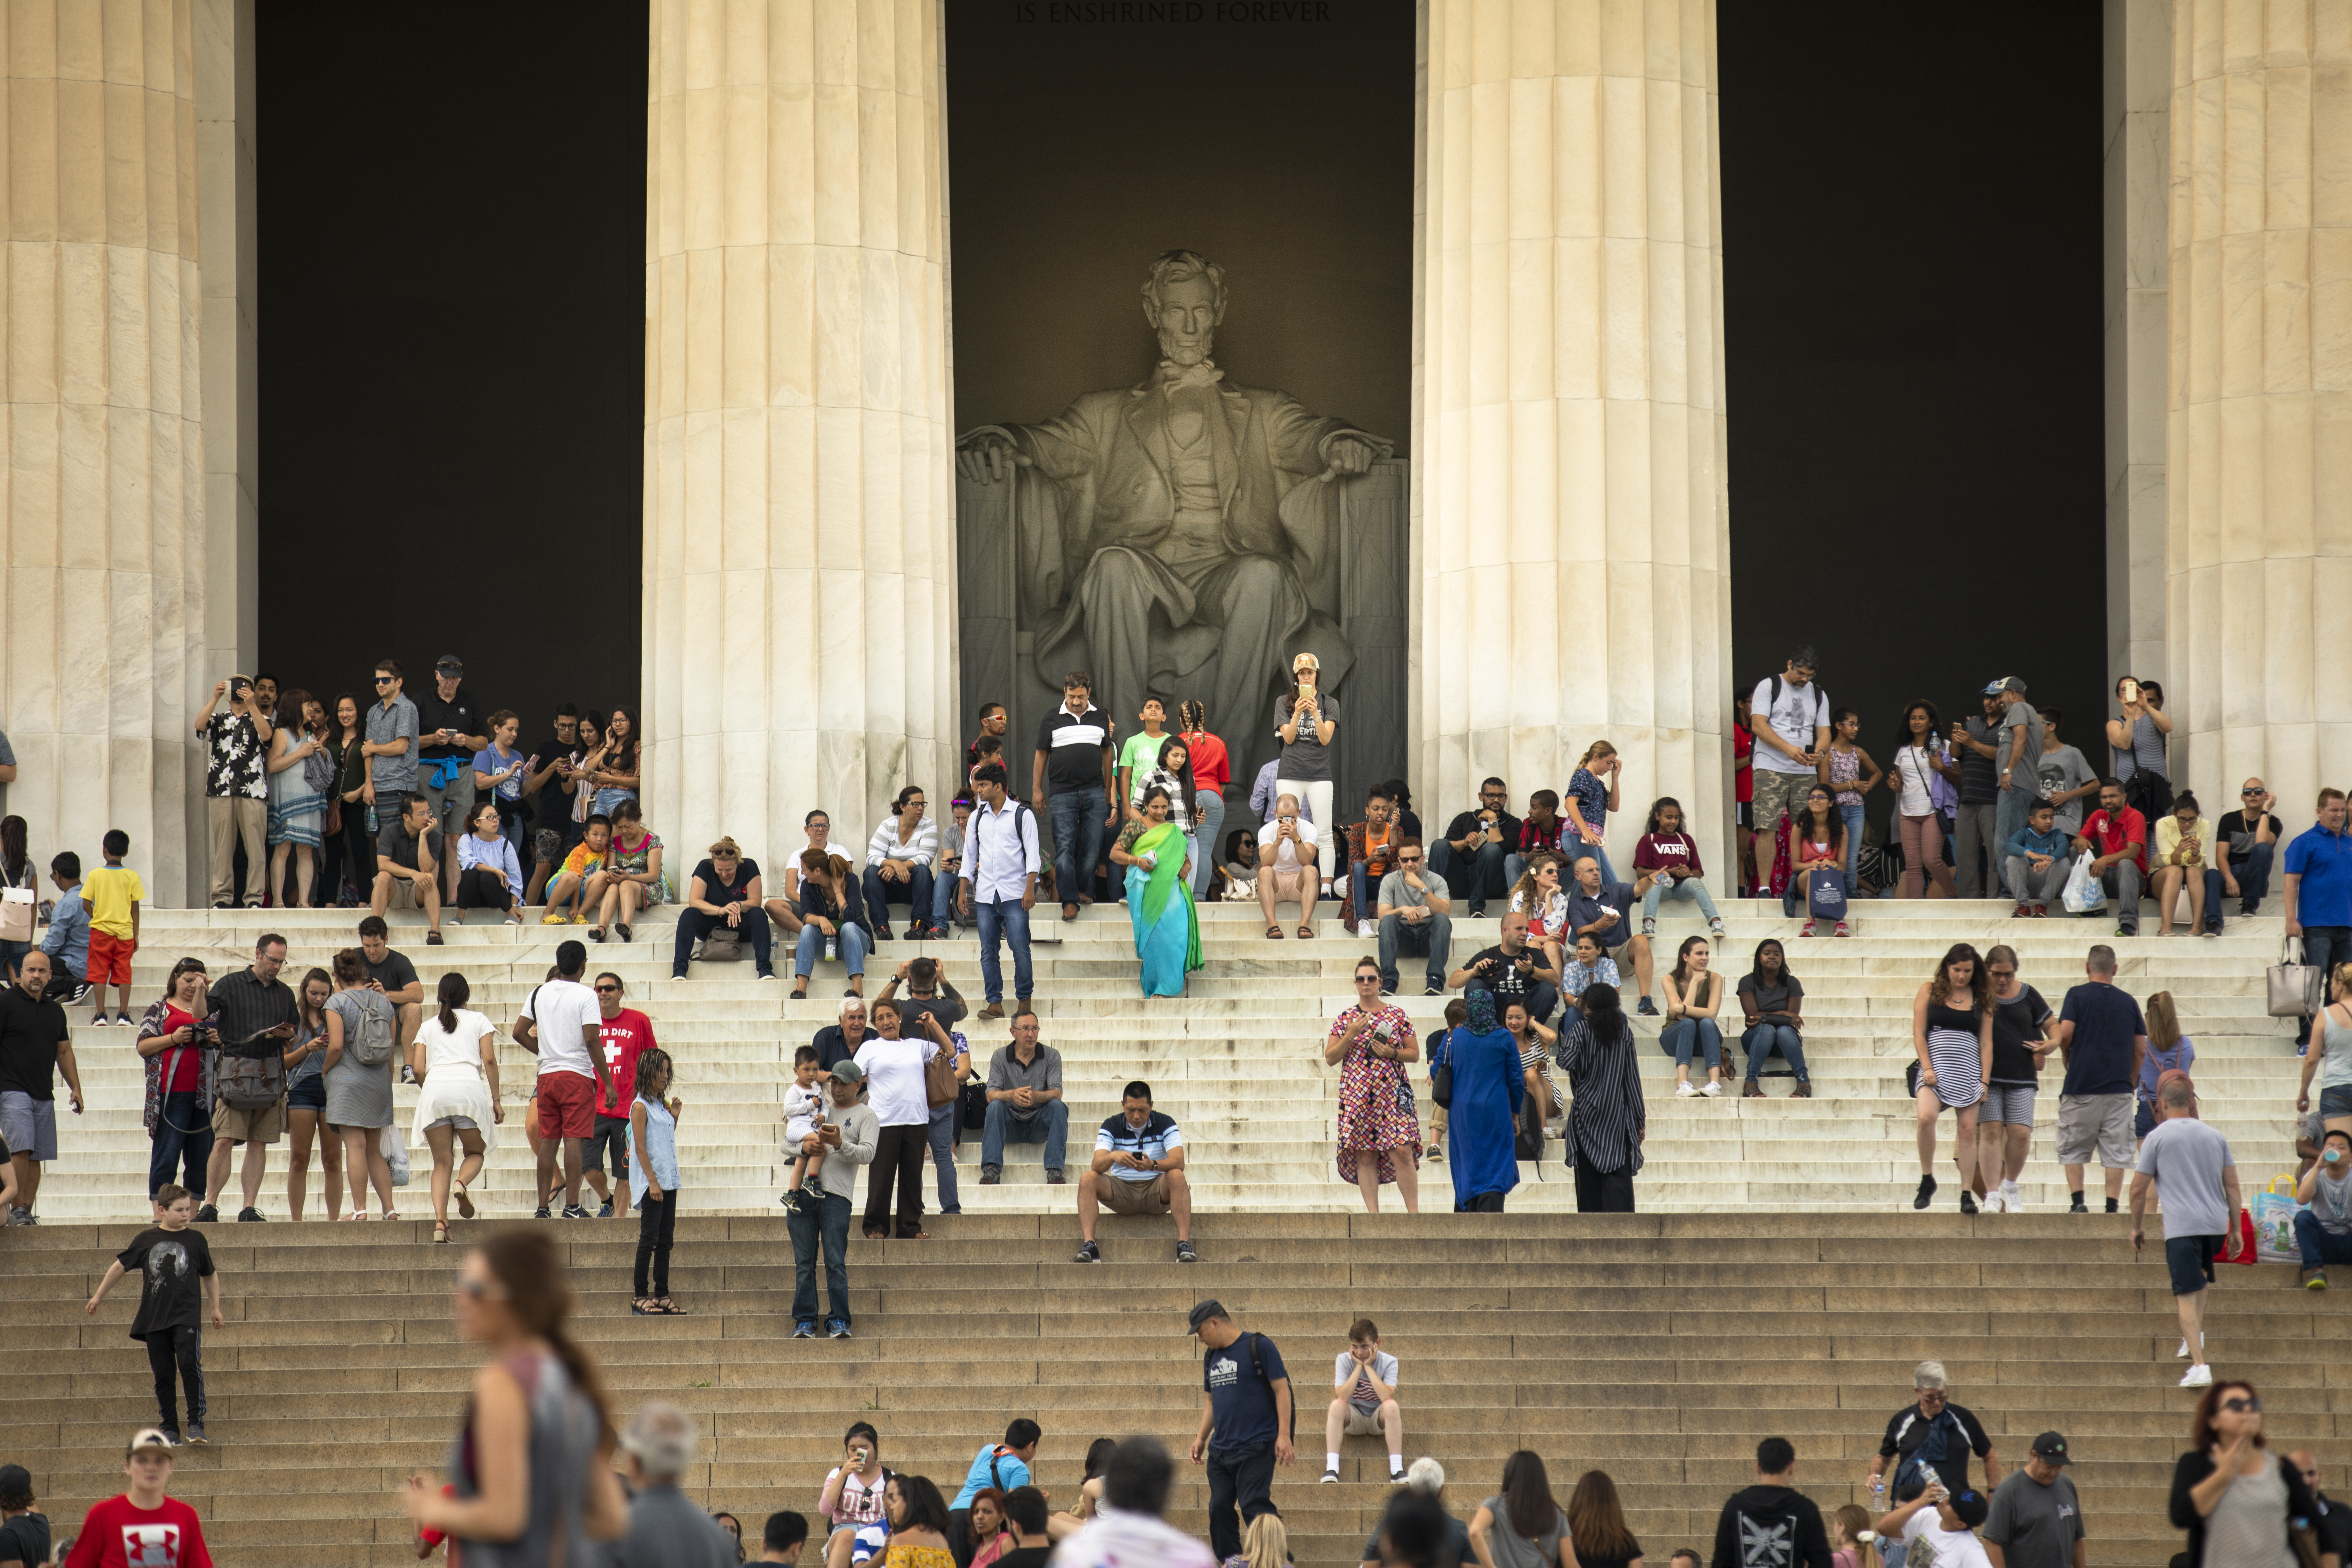 Crowd in front of the Lincoln Memorial